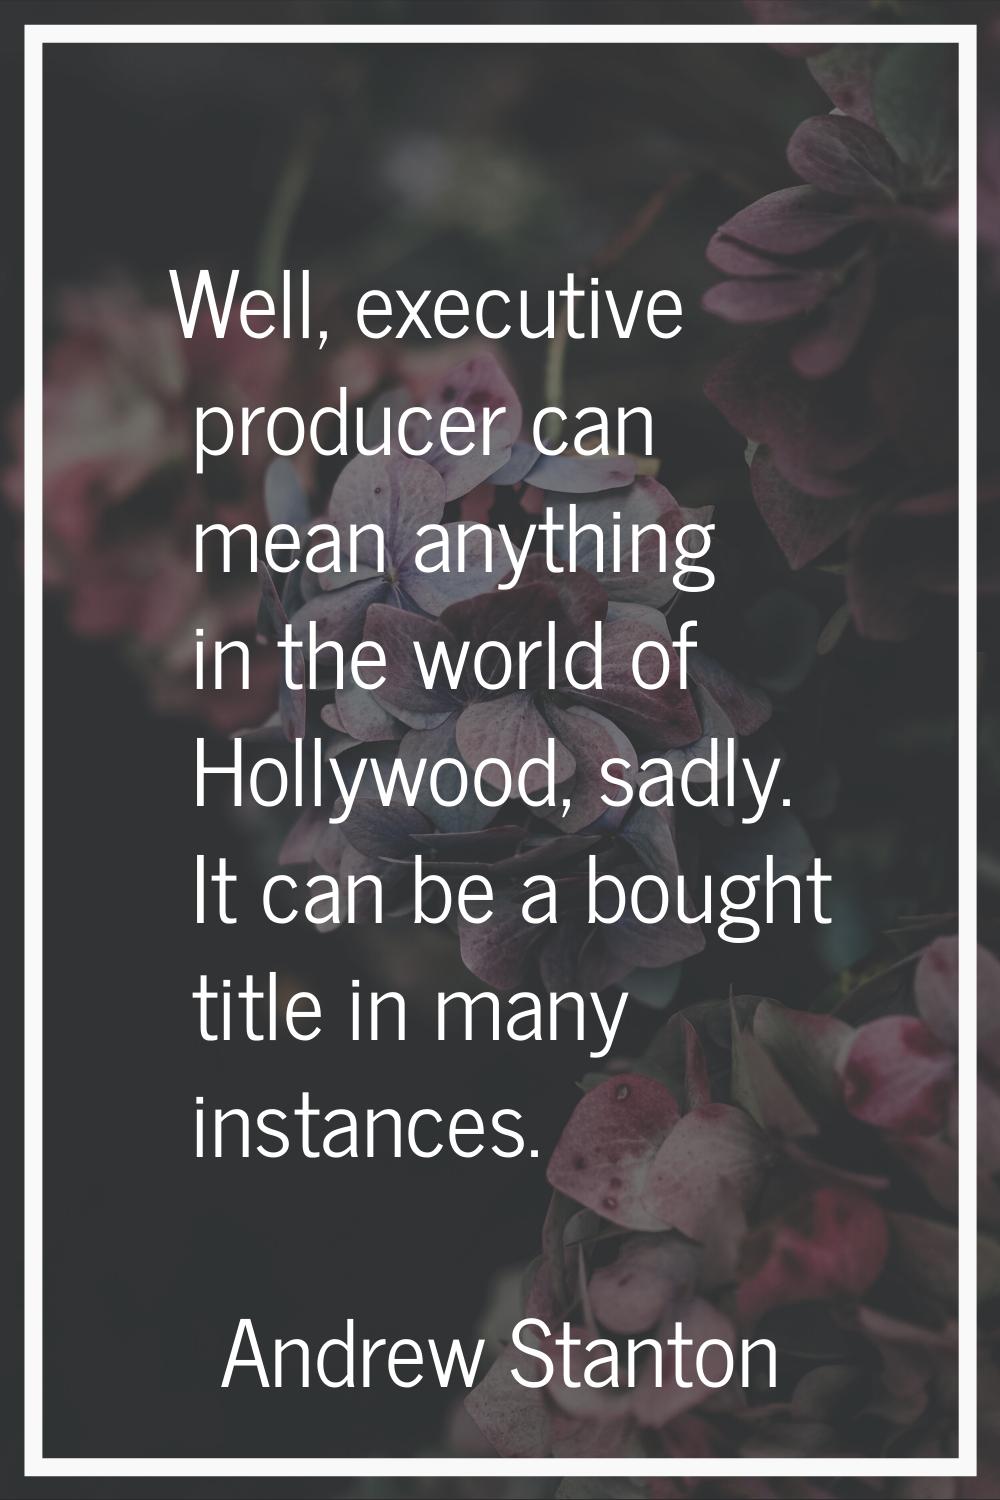 Well, executive producer can mean anything in the world of Hollywood, sadly. It can be a bought tit